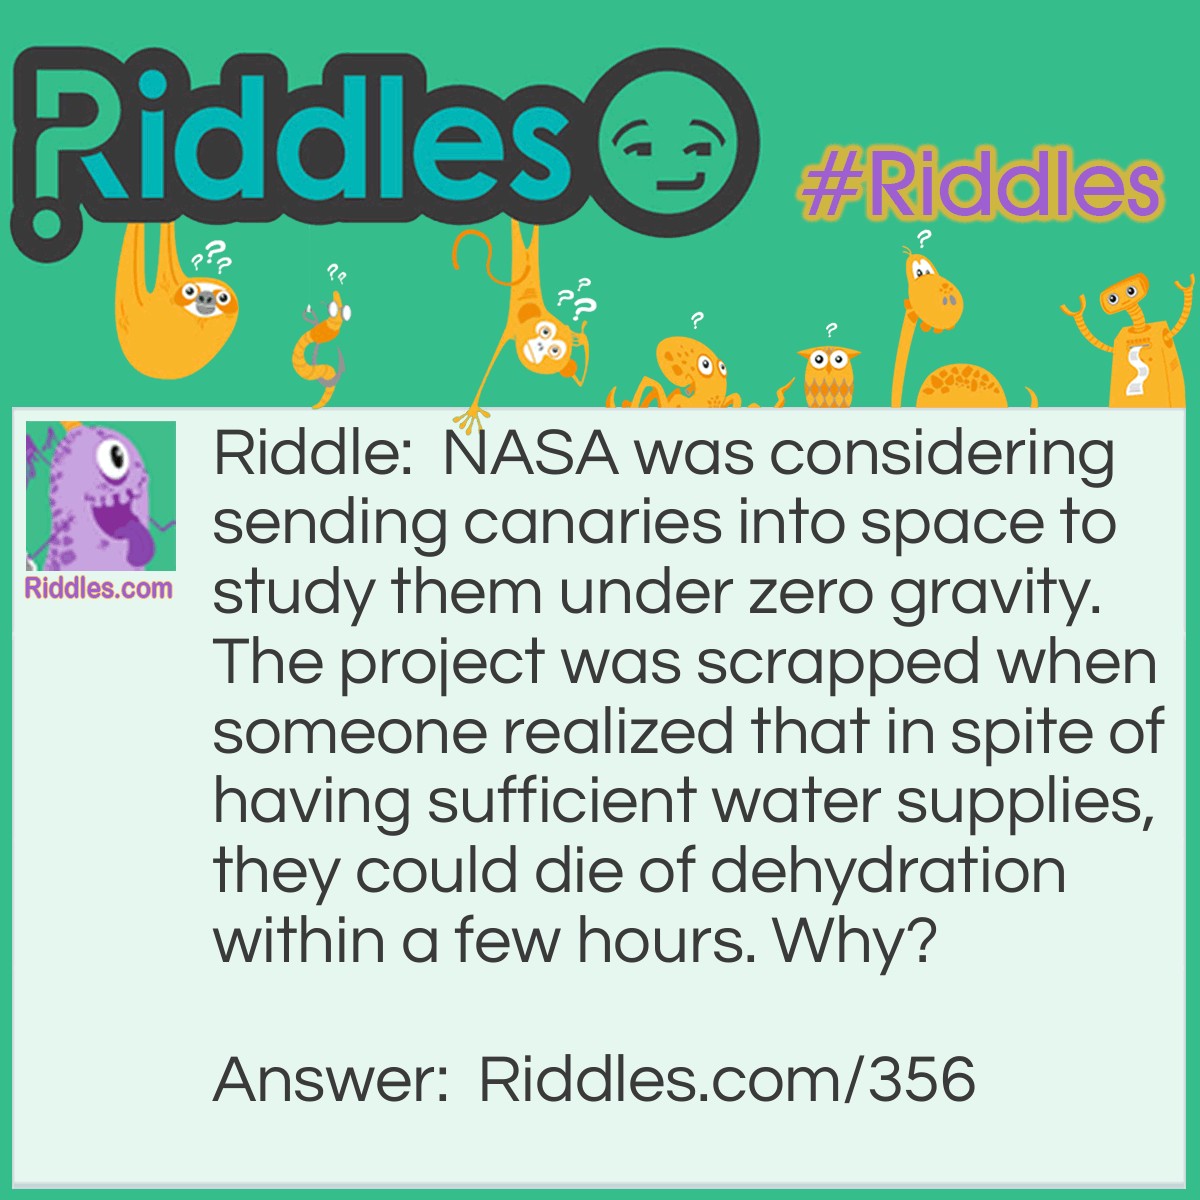 Riddle: NASA was considering sending canaries into space to study them under zero gravity. The project was scrapped when someone realized that in spite of having sufficient water supplies, they could die of dehydration within a few hours. Why? Answer: Birds, unlike humans, need gravity to swallow. Humans can swallow even while hanging upside down.